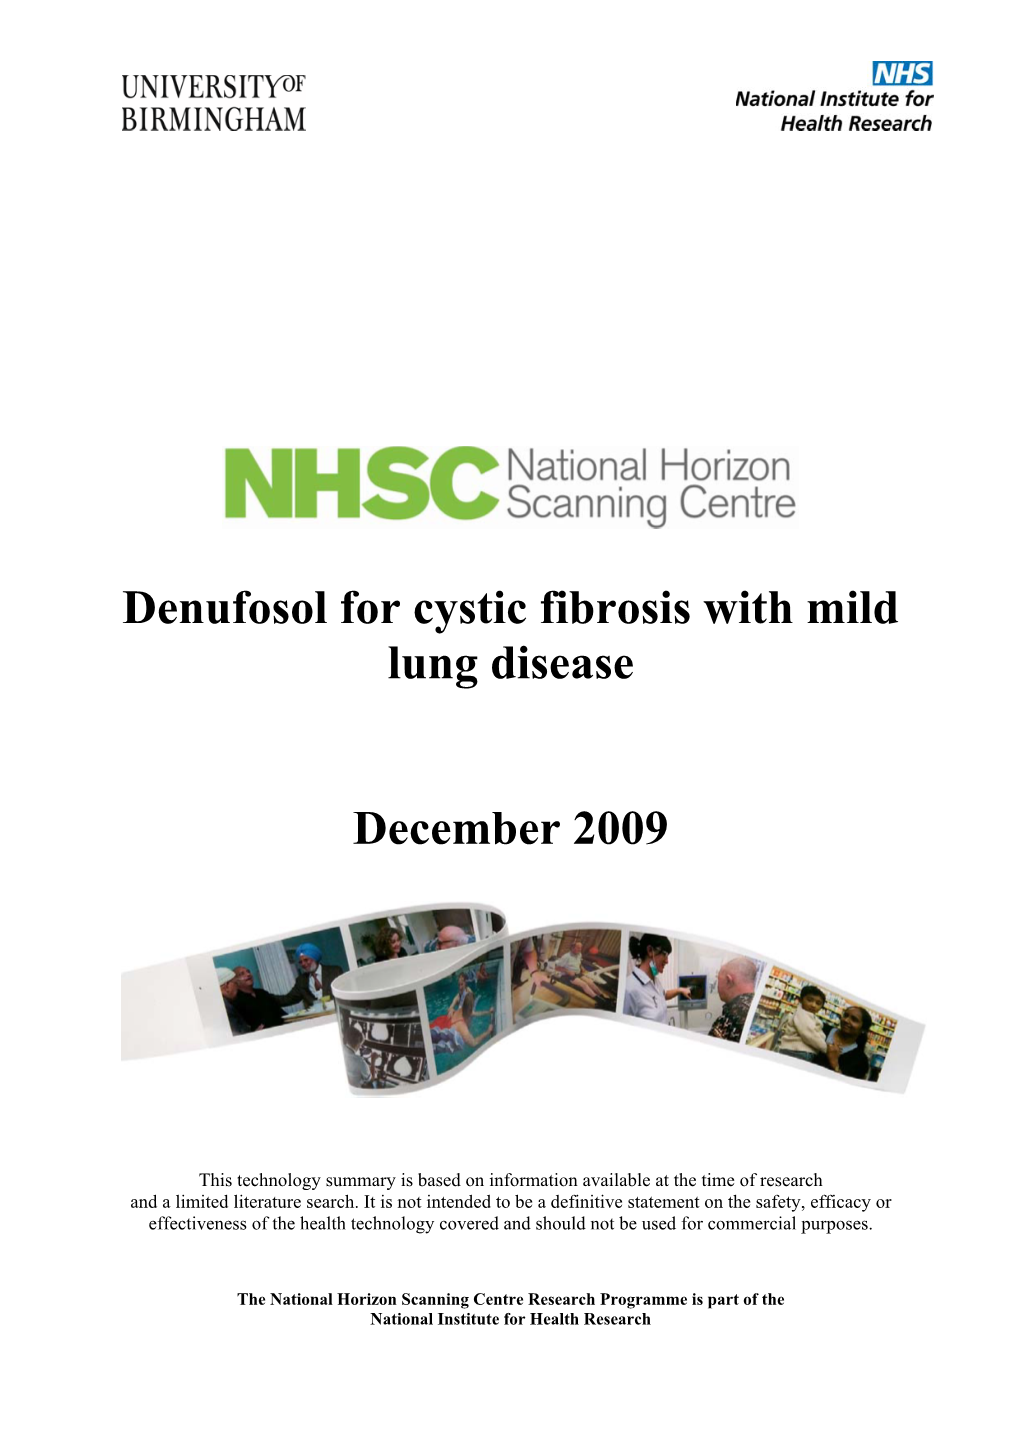 Denufosol for Cystic Fibrosis with Mild Lung Disease December 2009